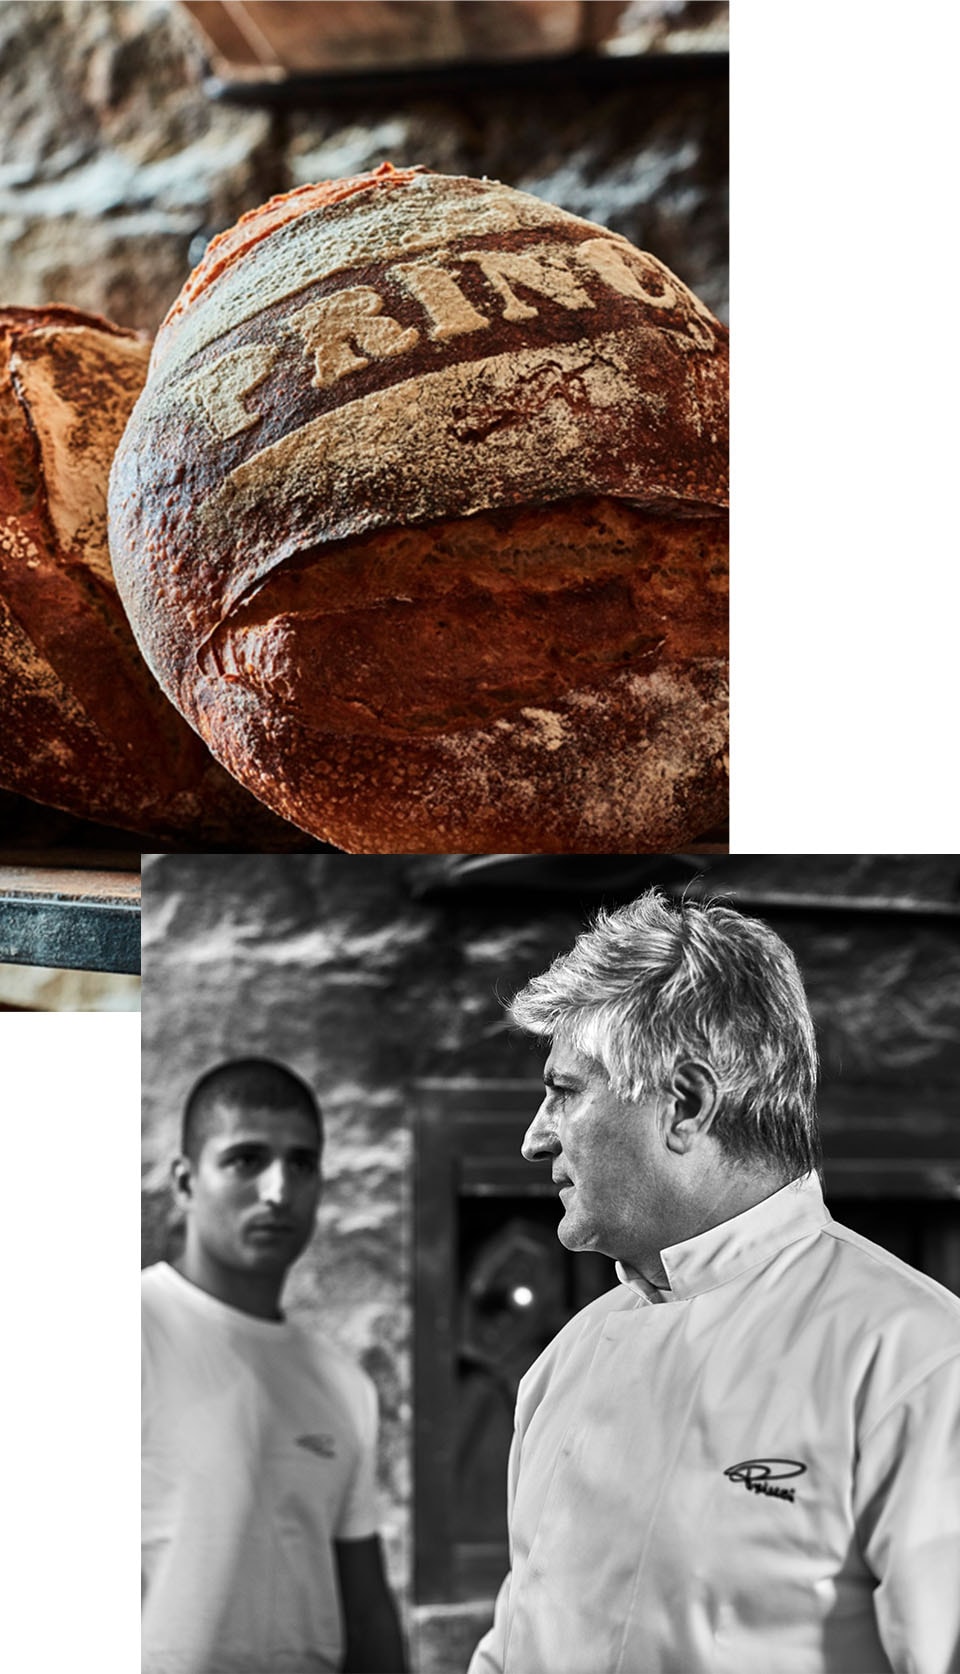 Collage of a closeup of a loaf of bread that says "Princi" and two men facing each other